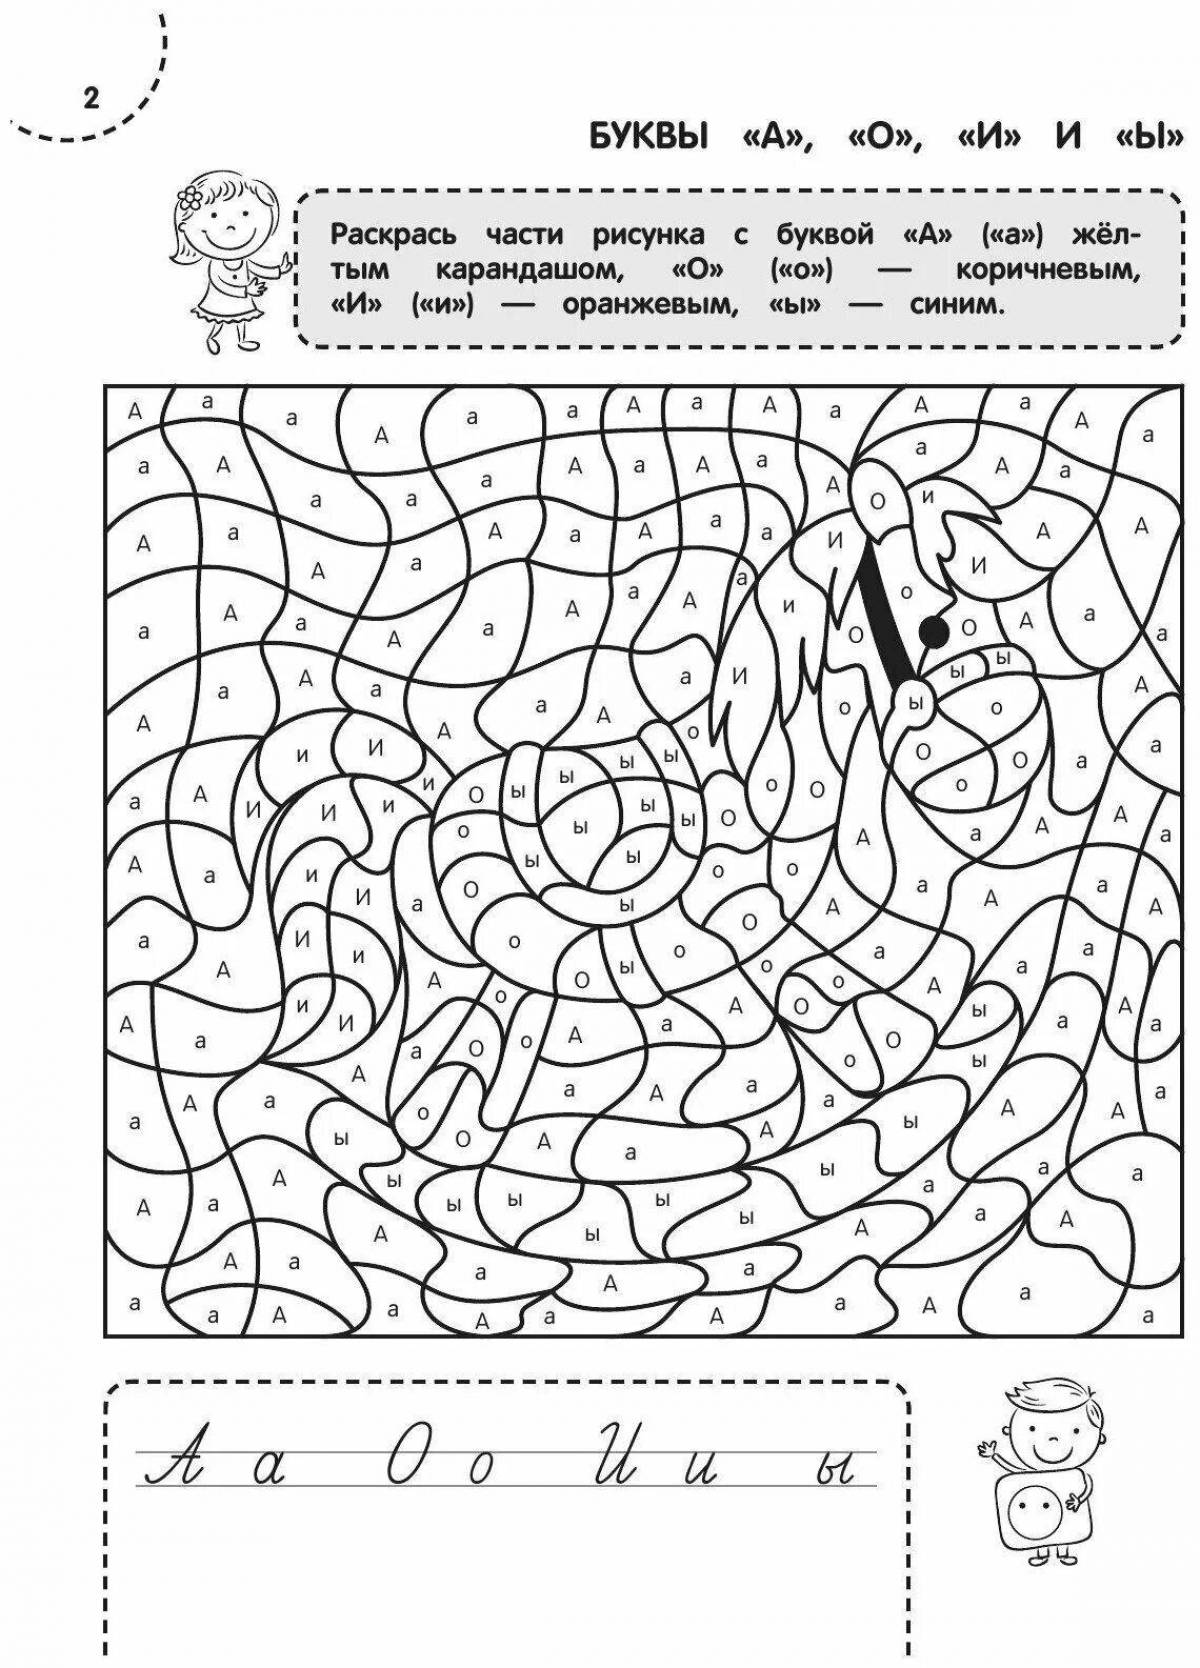 Brilliant hissing snake coloring book